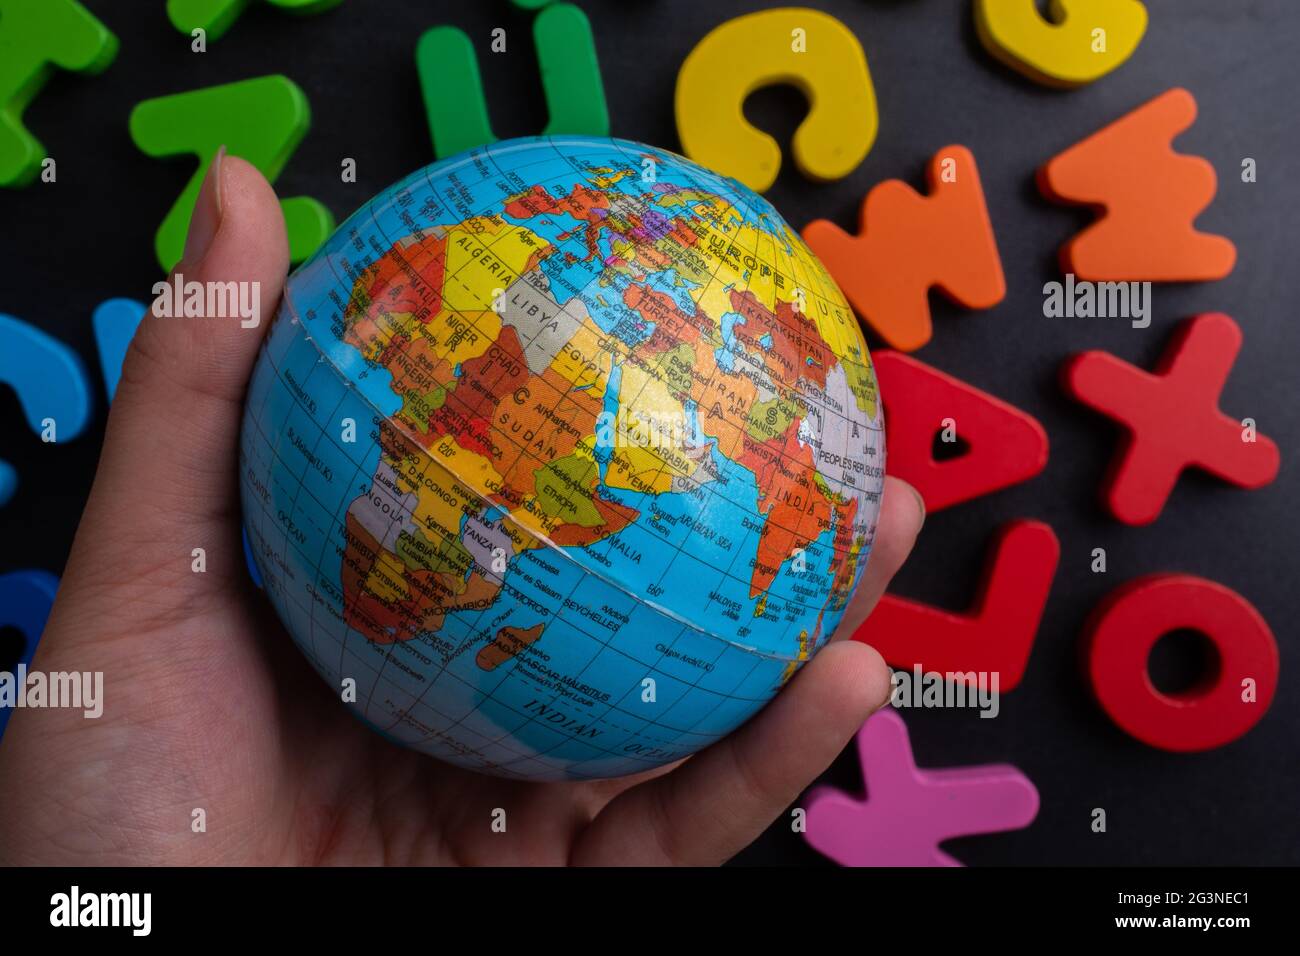 Hand holding a globe model on colorful letters on a black background Stock Photo